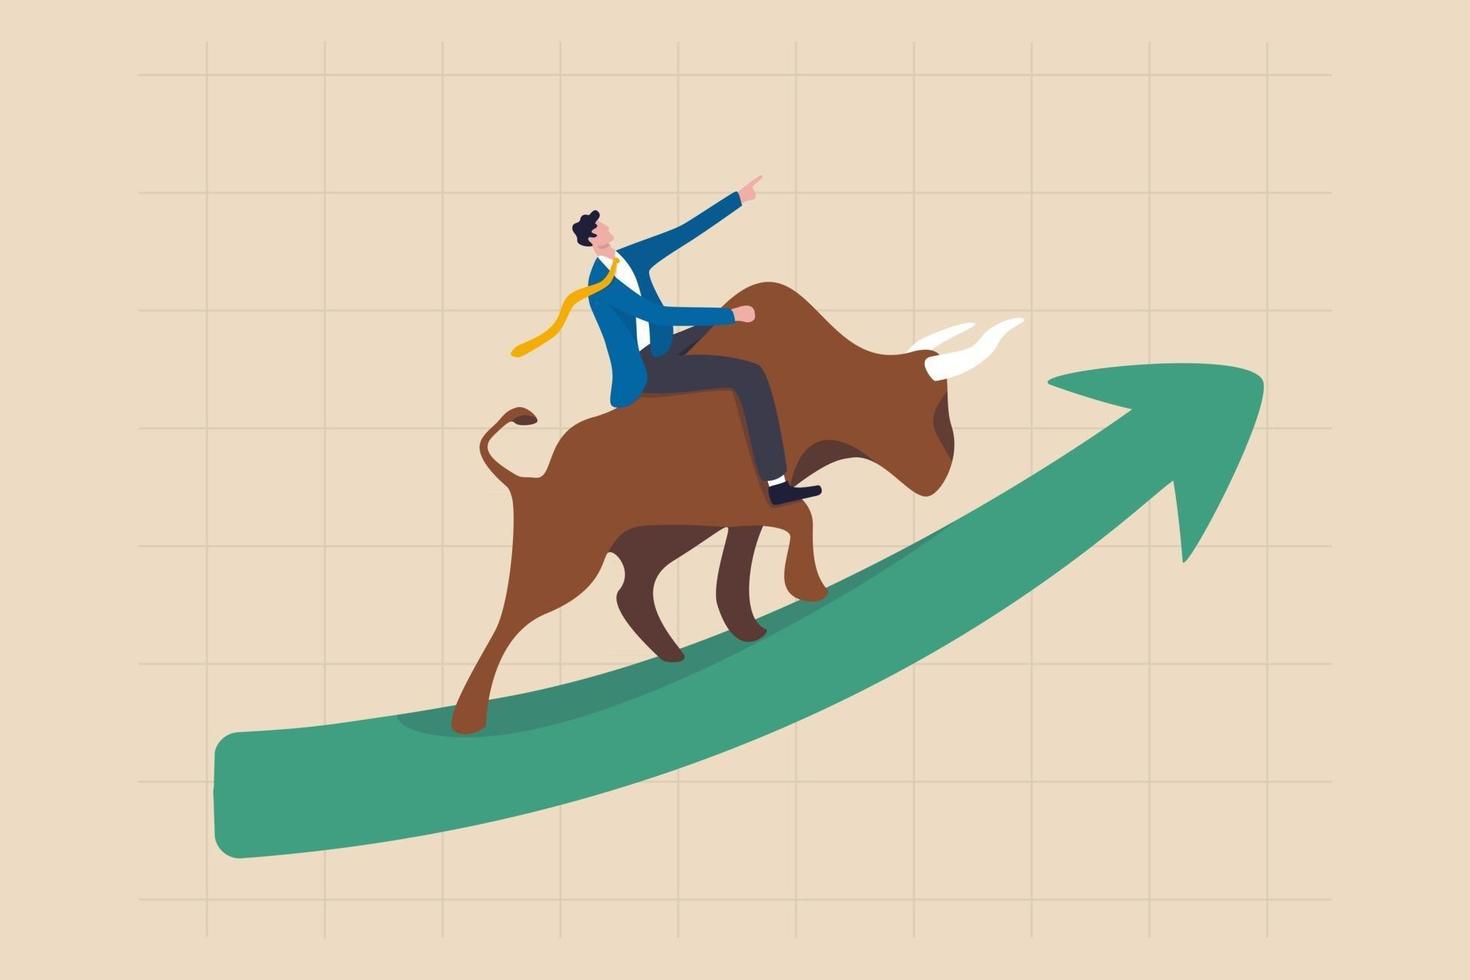 Stock market bull market, financial asset value and price rising up, investor and trader gain more profit concept, confident businessman investor riding bull running on rising up upward green graph. vector